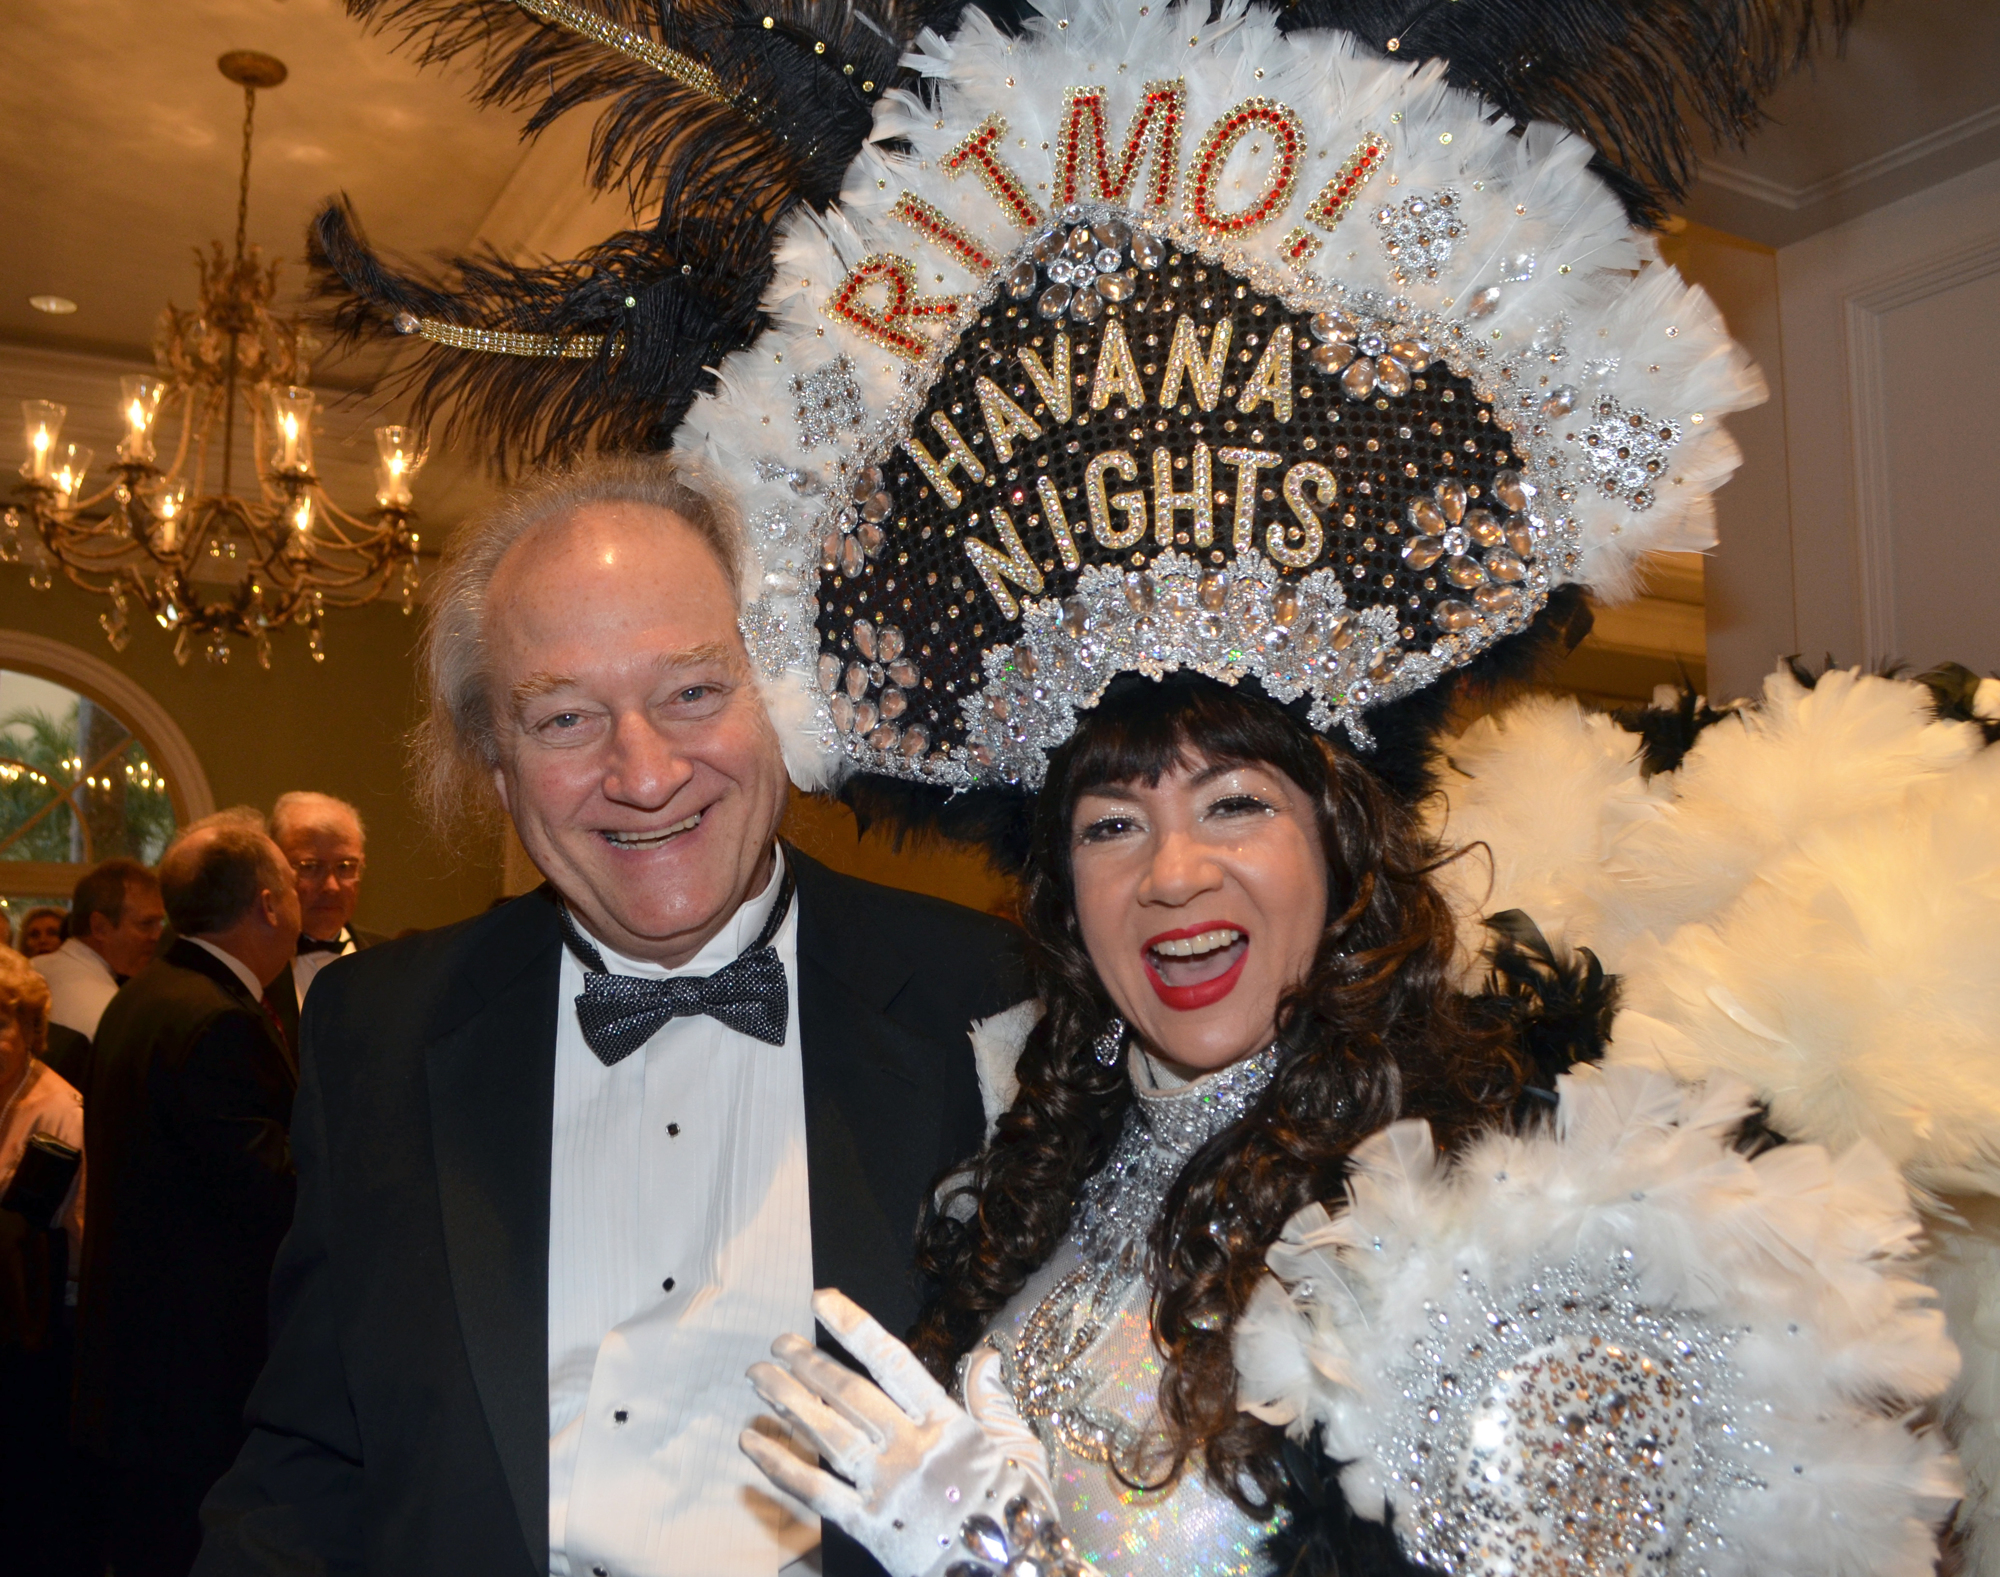 Gary Sweetman poses with a cabaret dancer at the Asolo Repertory Theatre Gala: “Cabaret at the Tropicana” on Saturday, March 5, at The Ritz-Carlton, Sarasota. Photo by Heather Merriman Saba